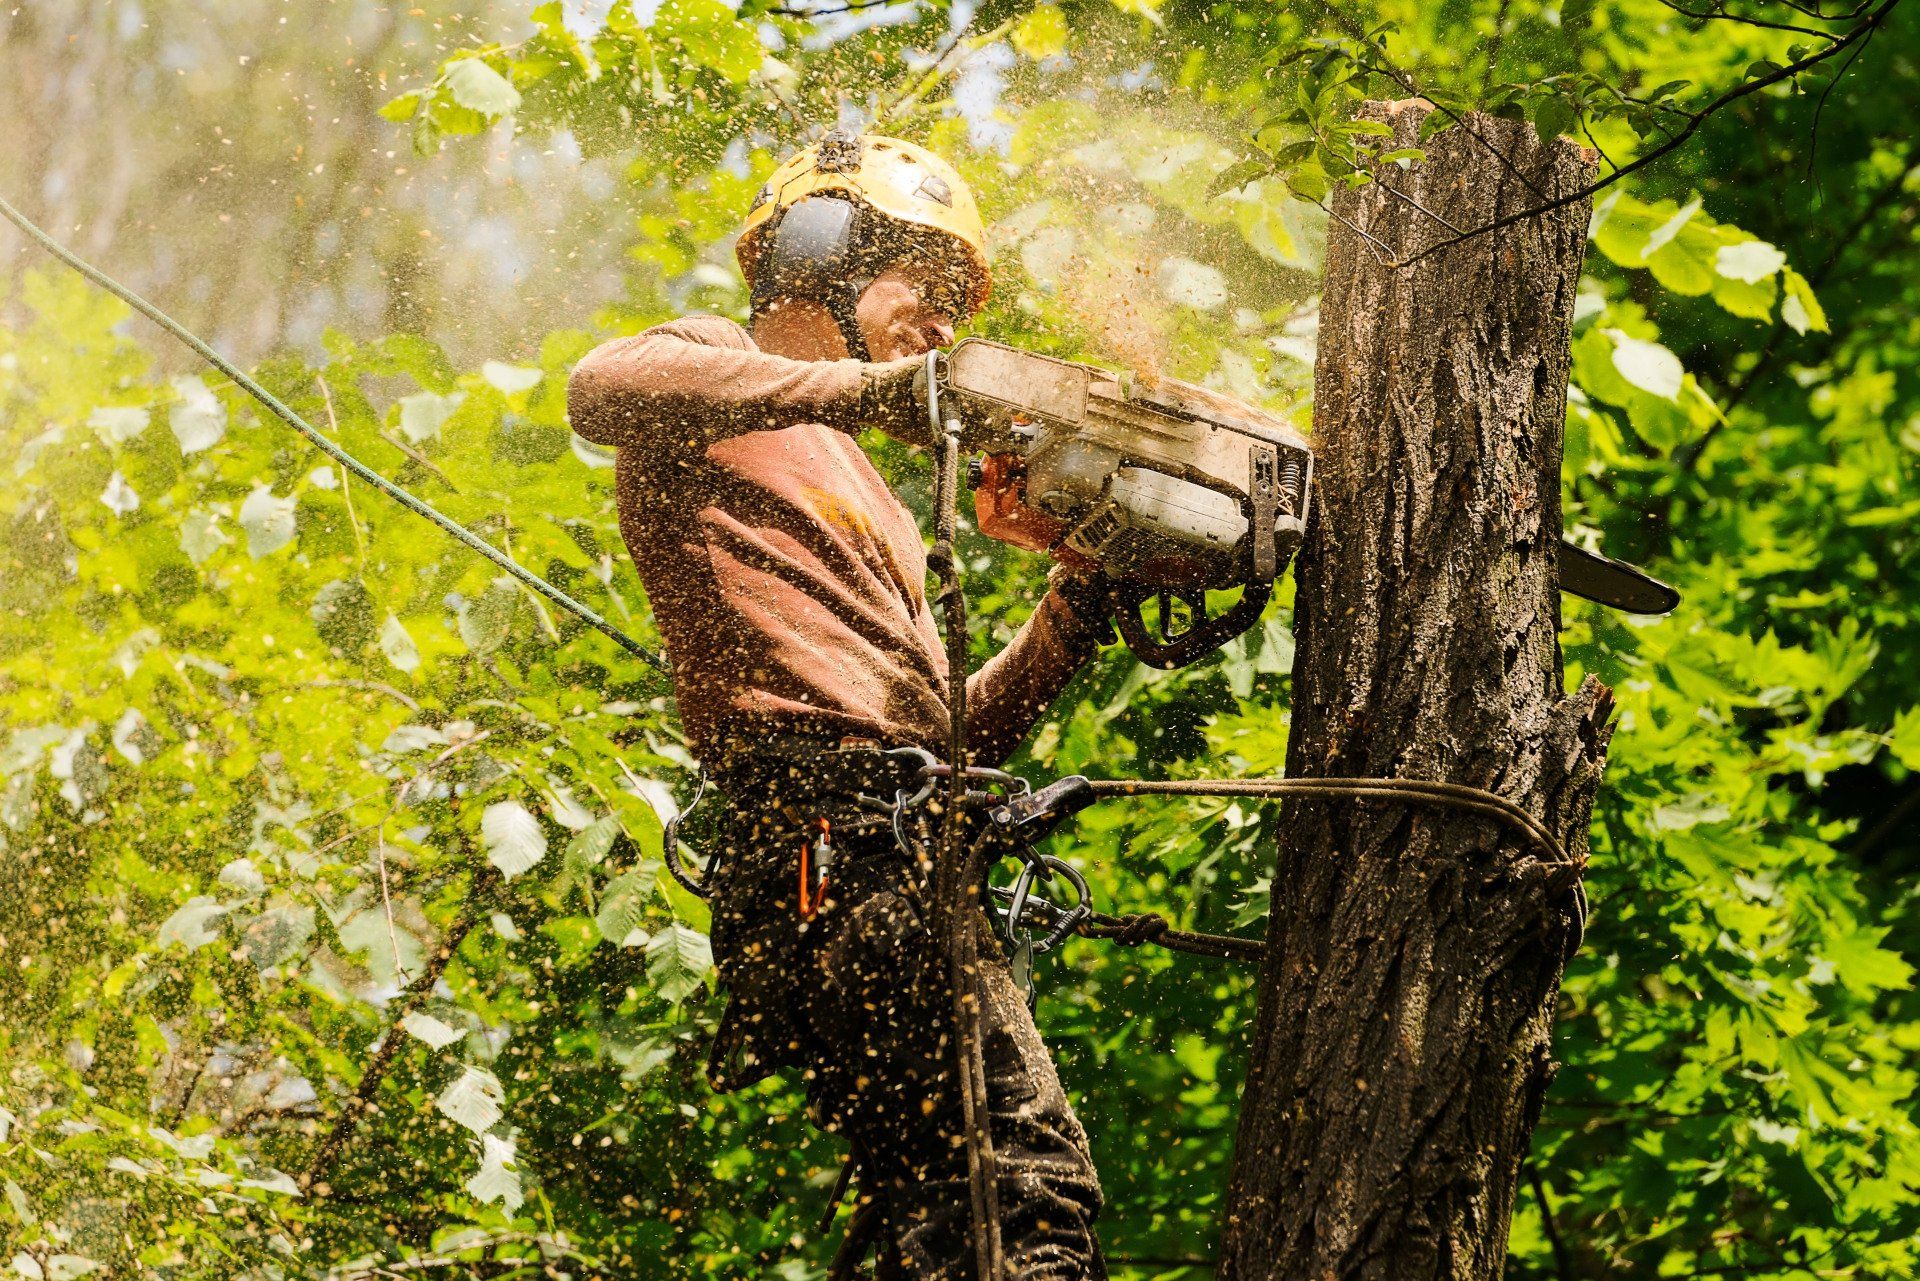 Arborist cutting tree holding a chainsaw